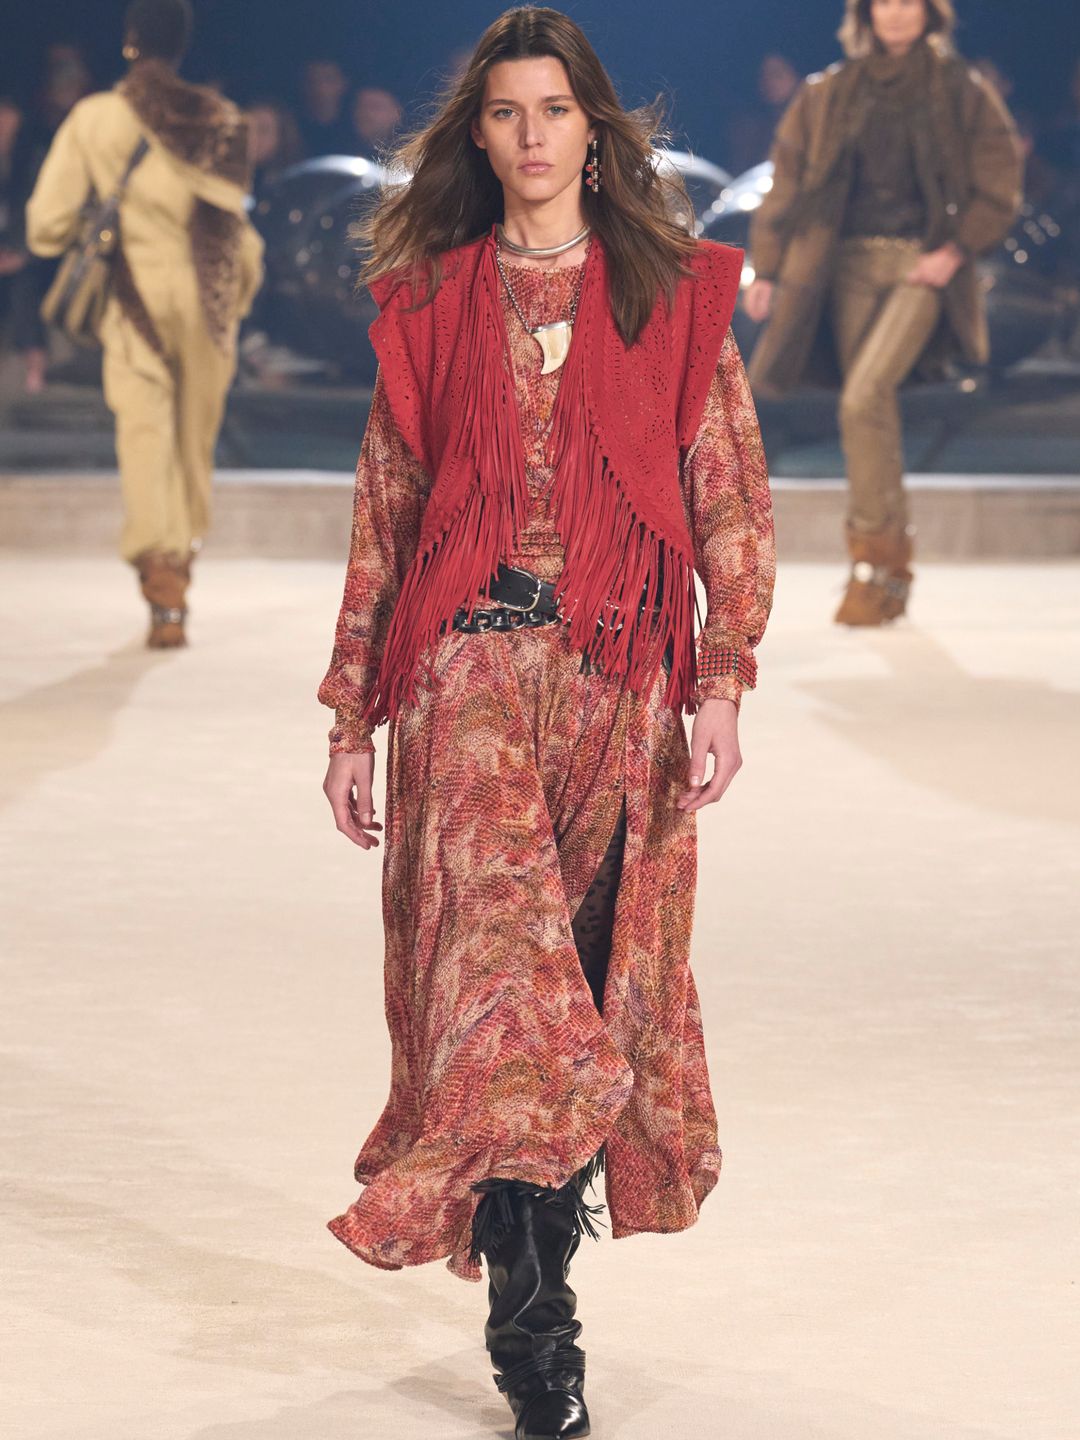 Isabel Marant opted for printed dresses and fringed finishes